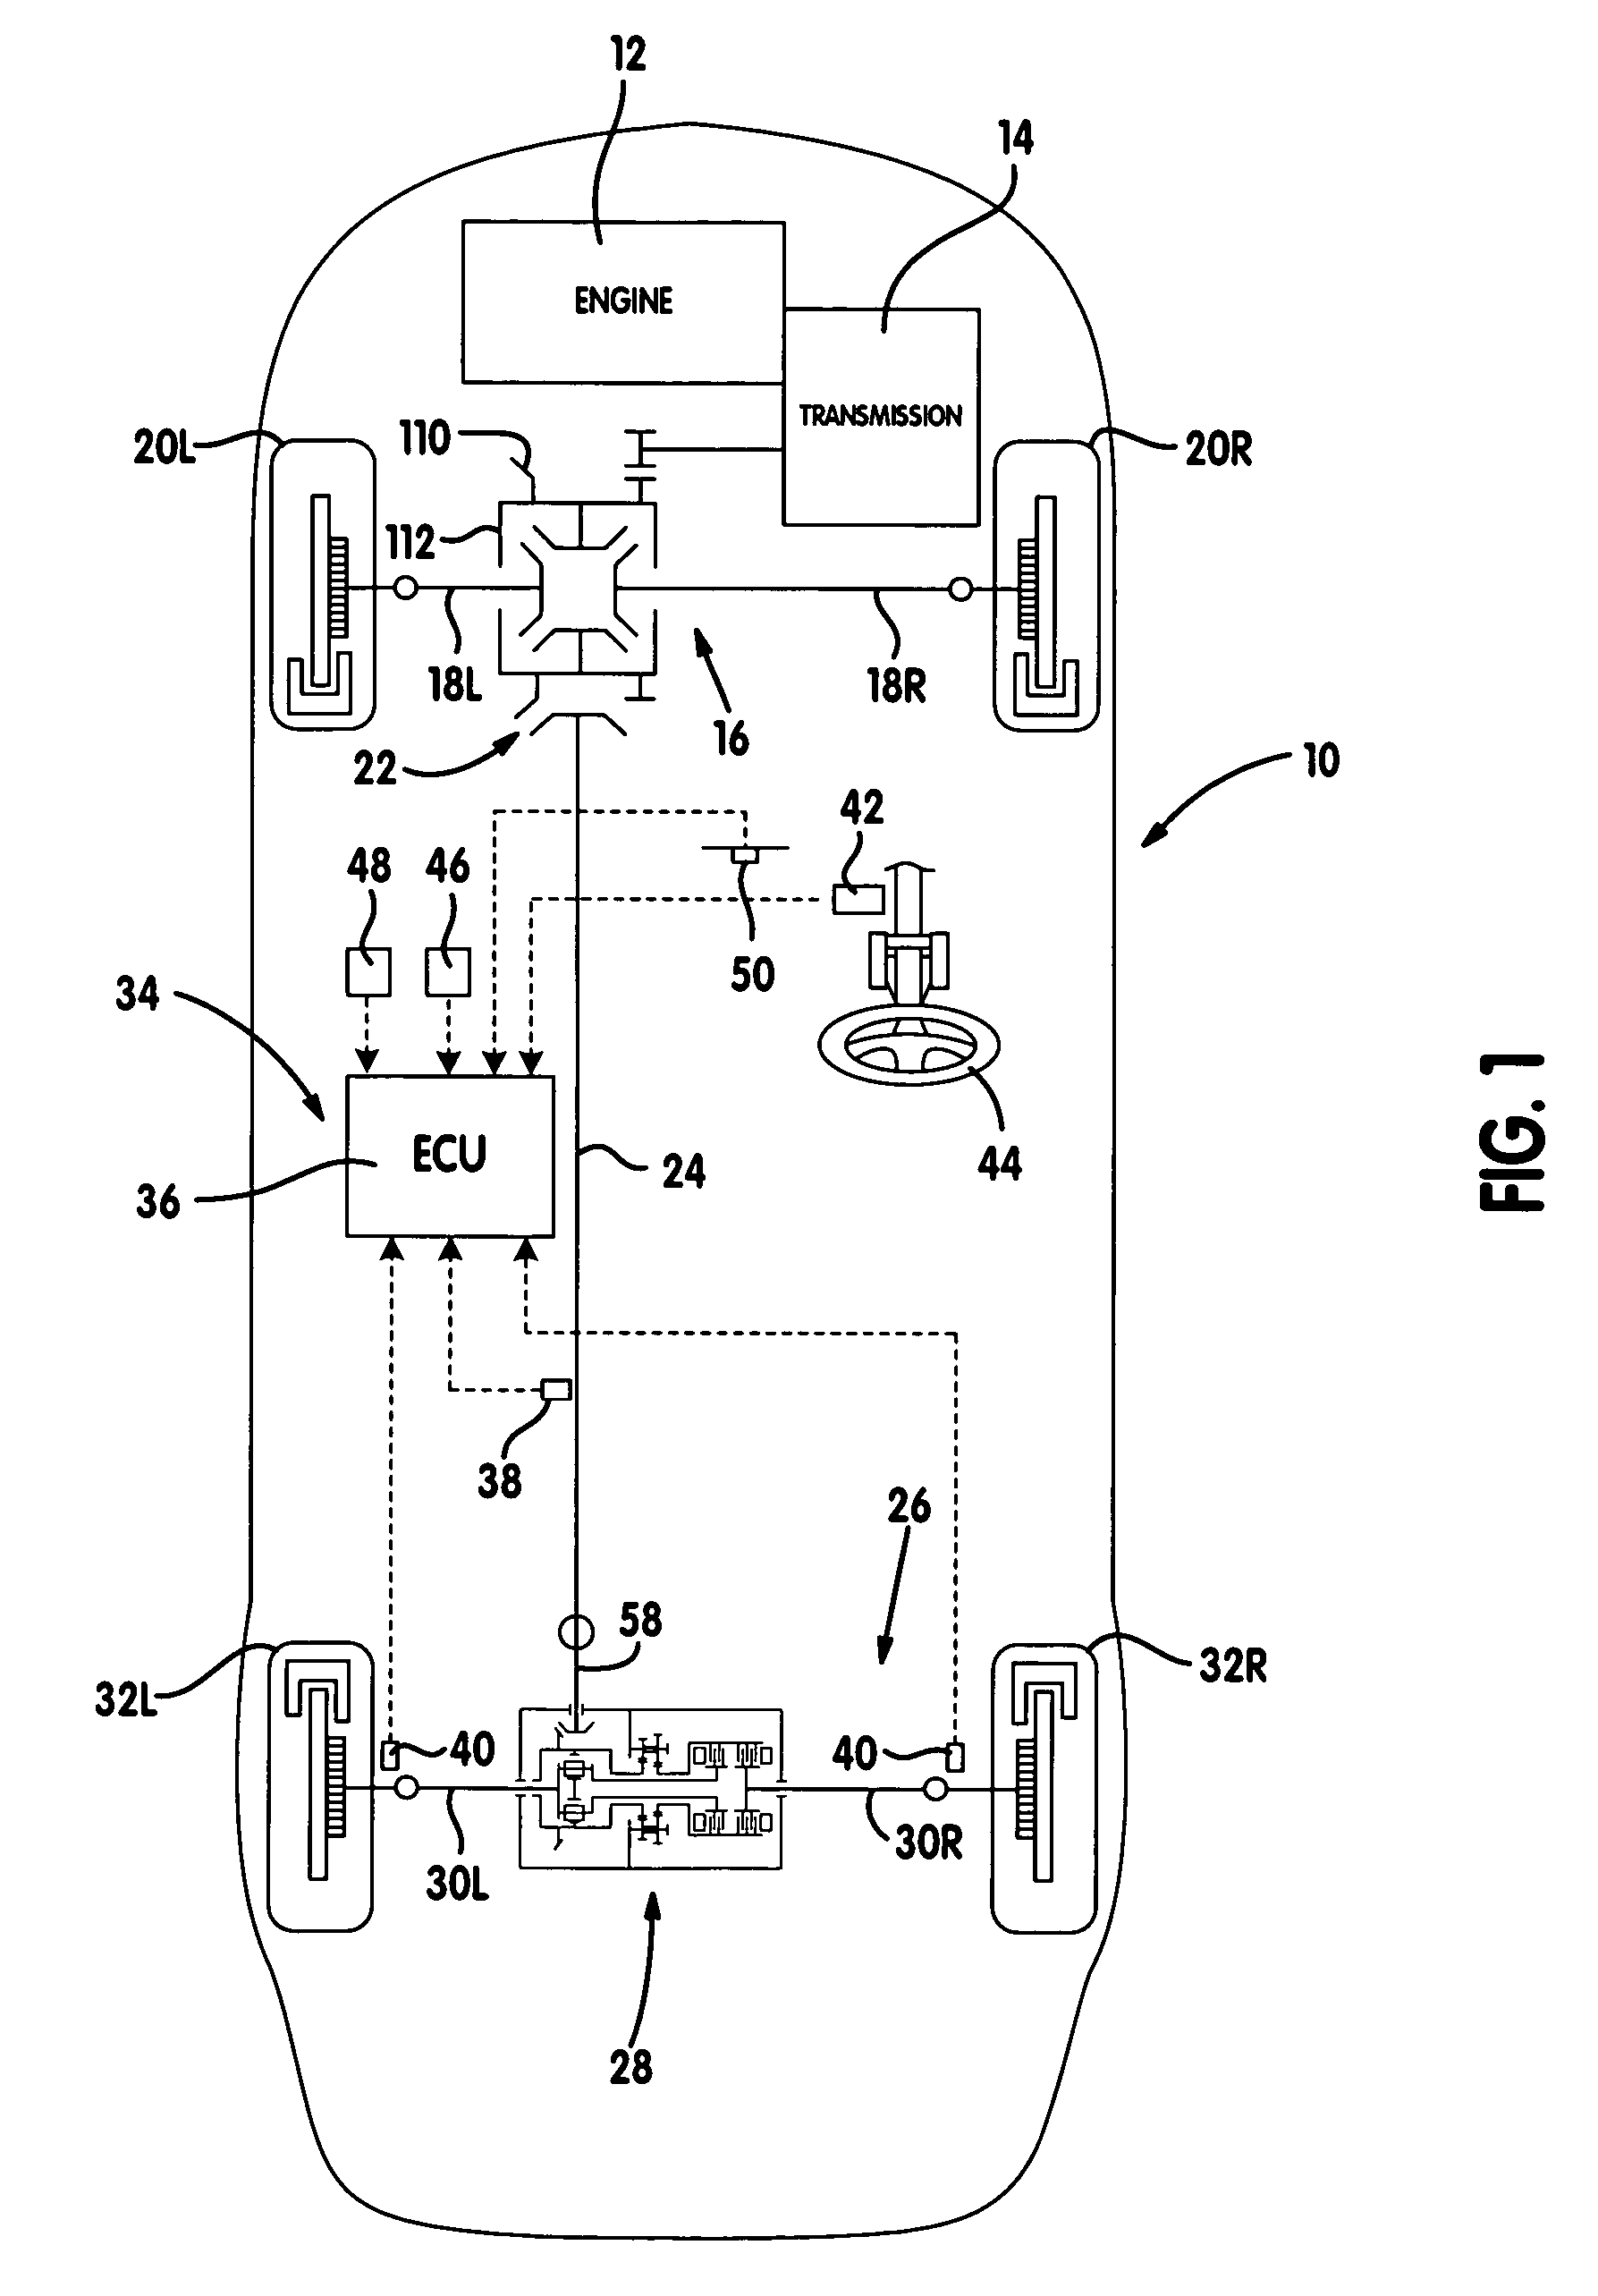 Torque vectoring drive axle assembly